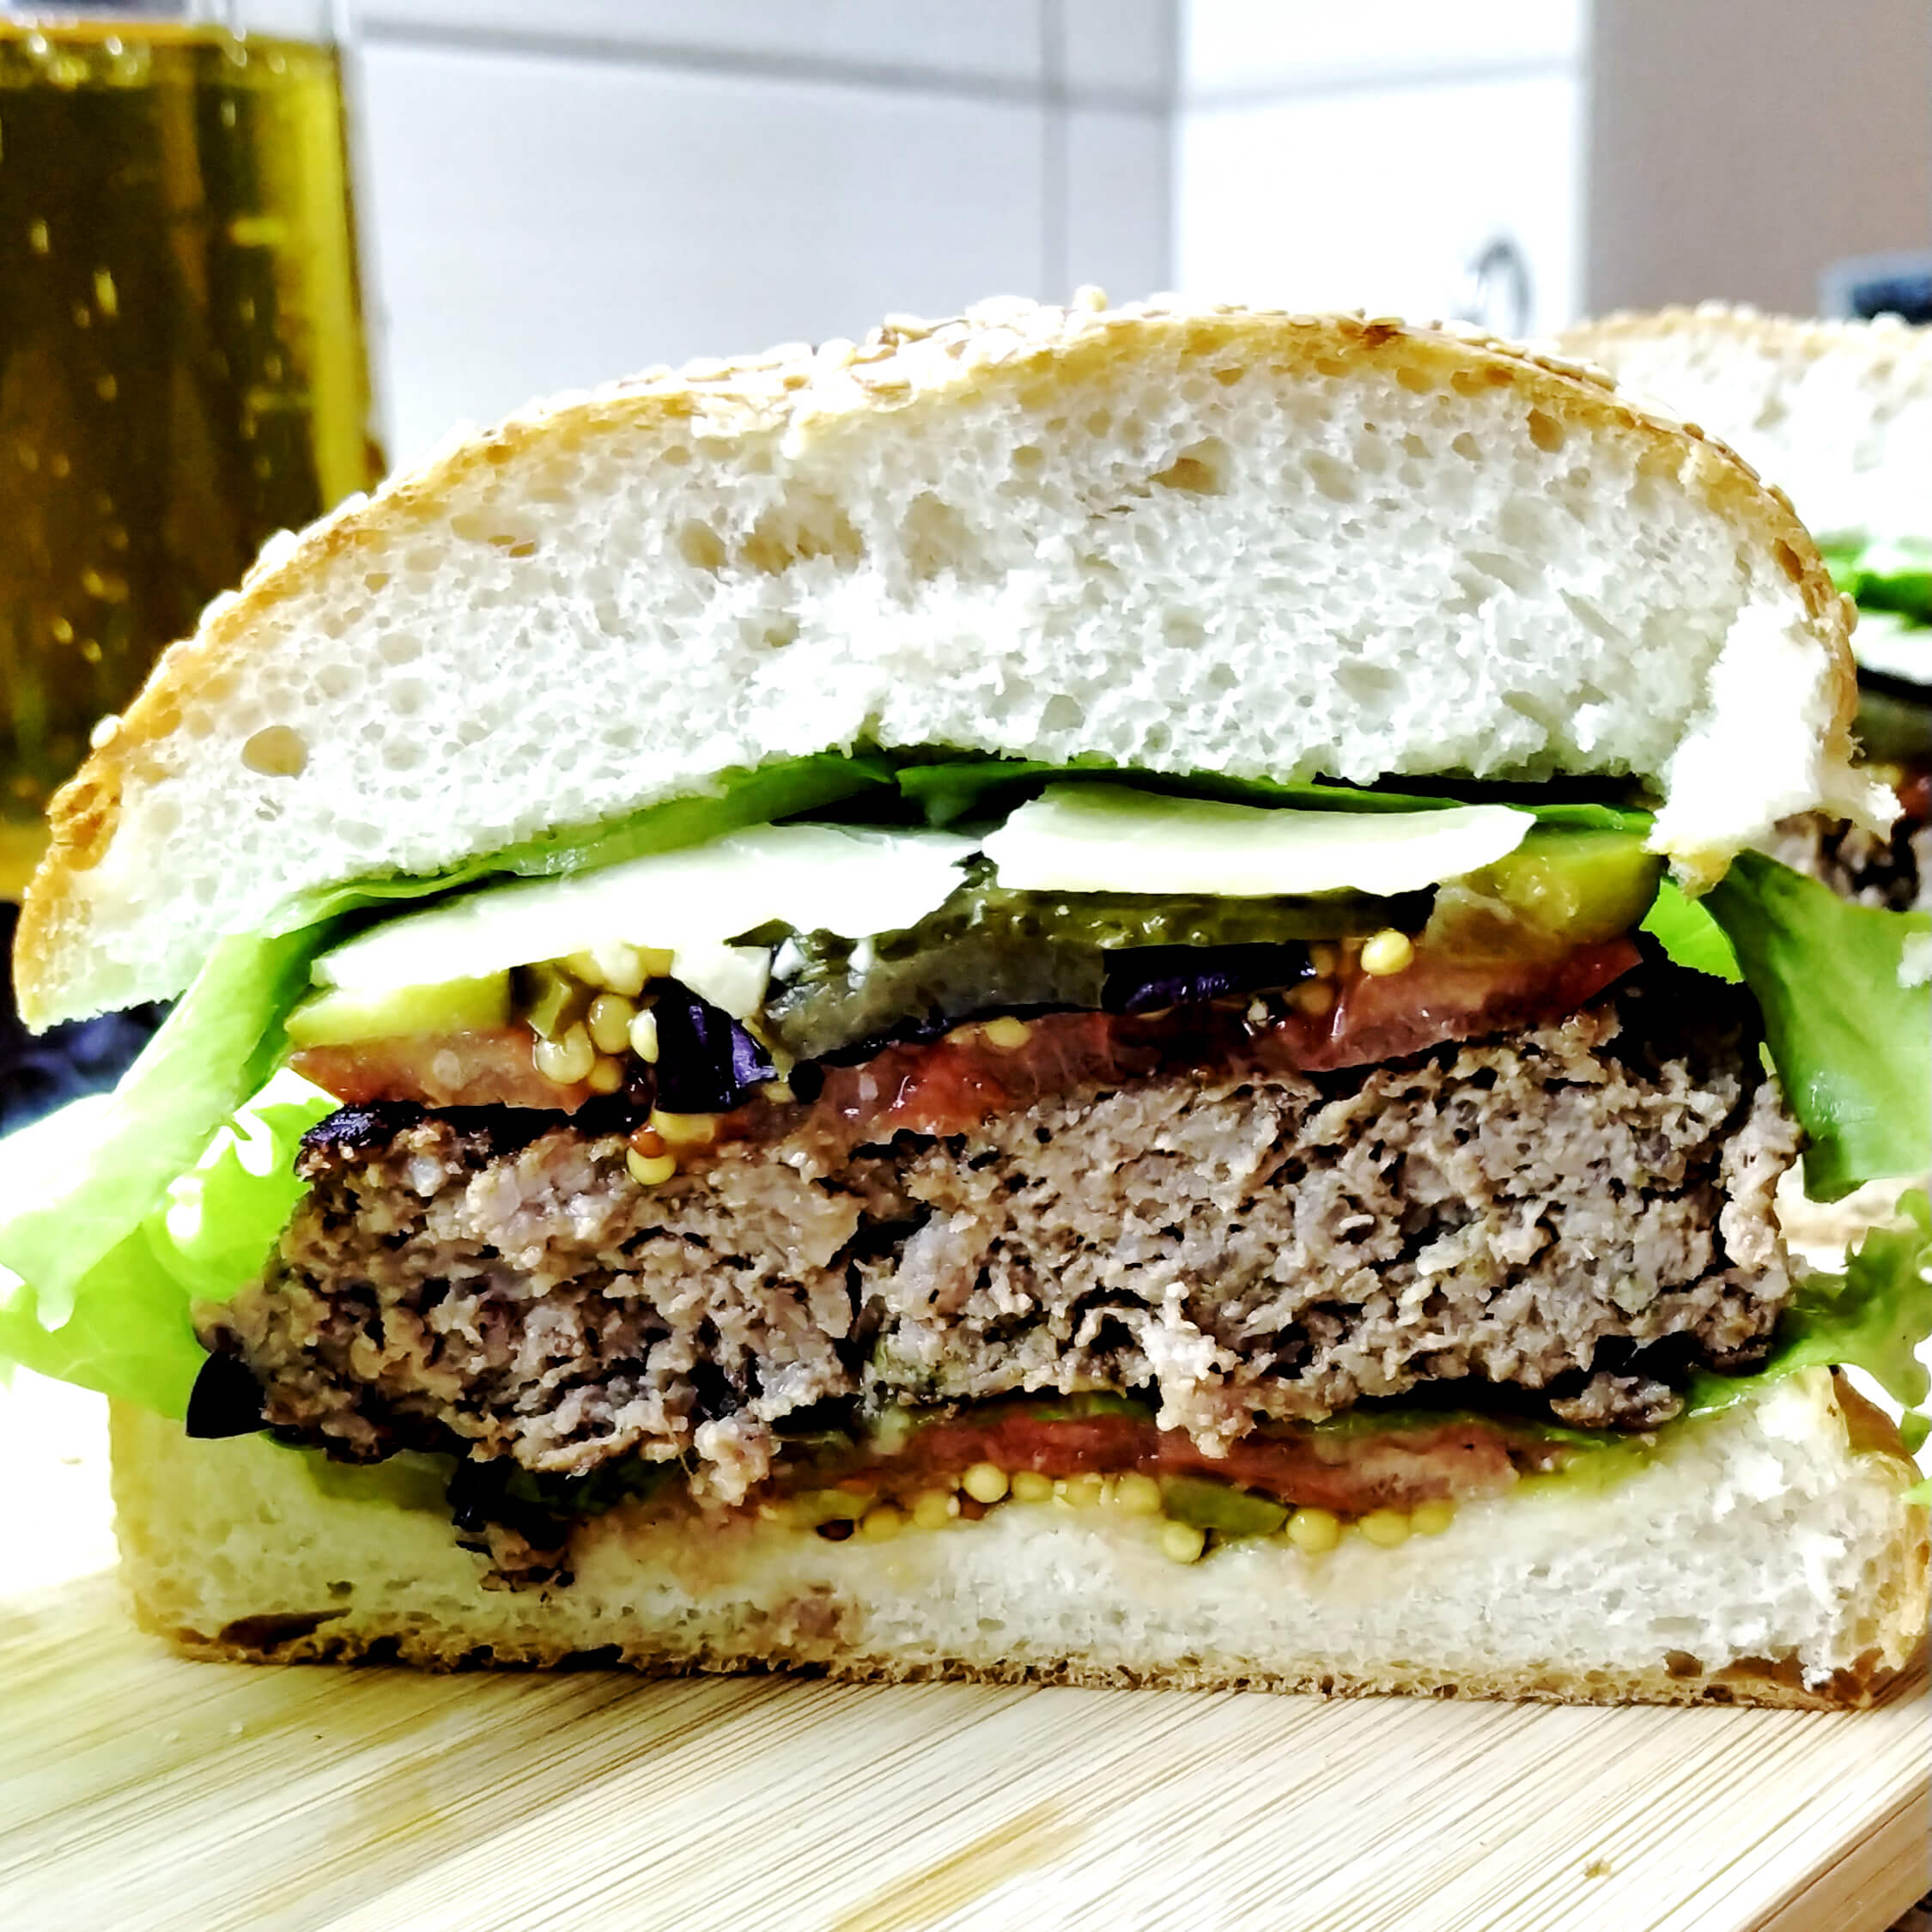 Homemade Burger with beef, pickles and Dijon mustard